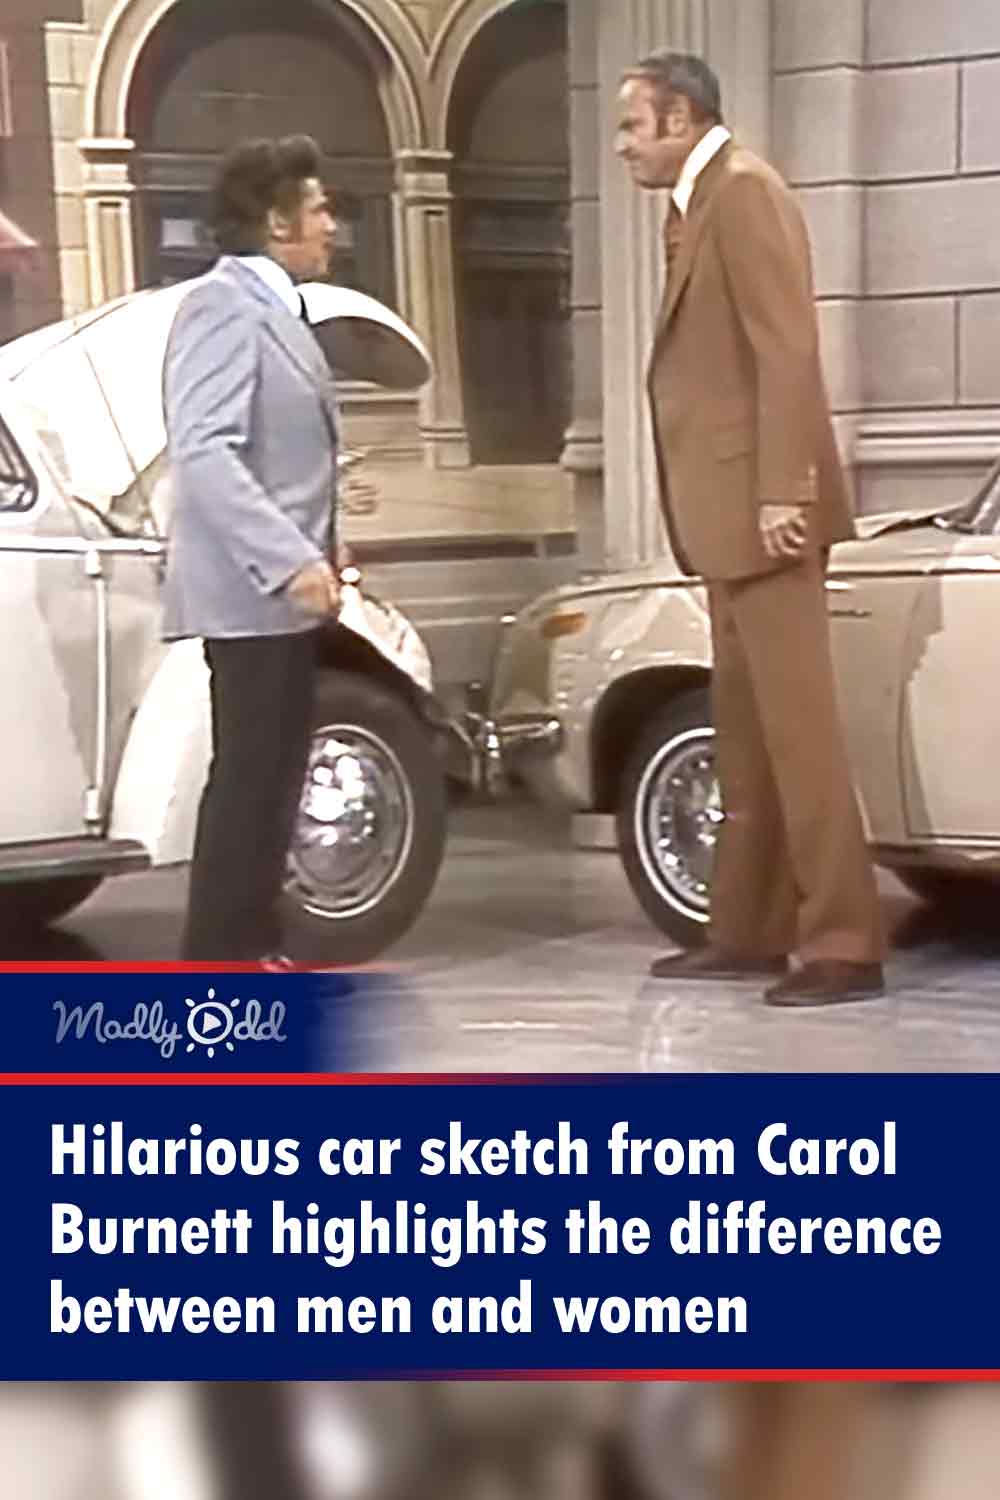 Hilarious car sketch from Carol Burnett highlights the difference between men and women